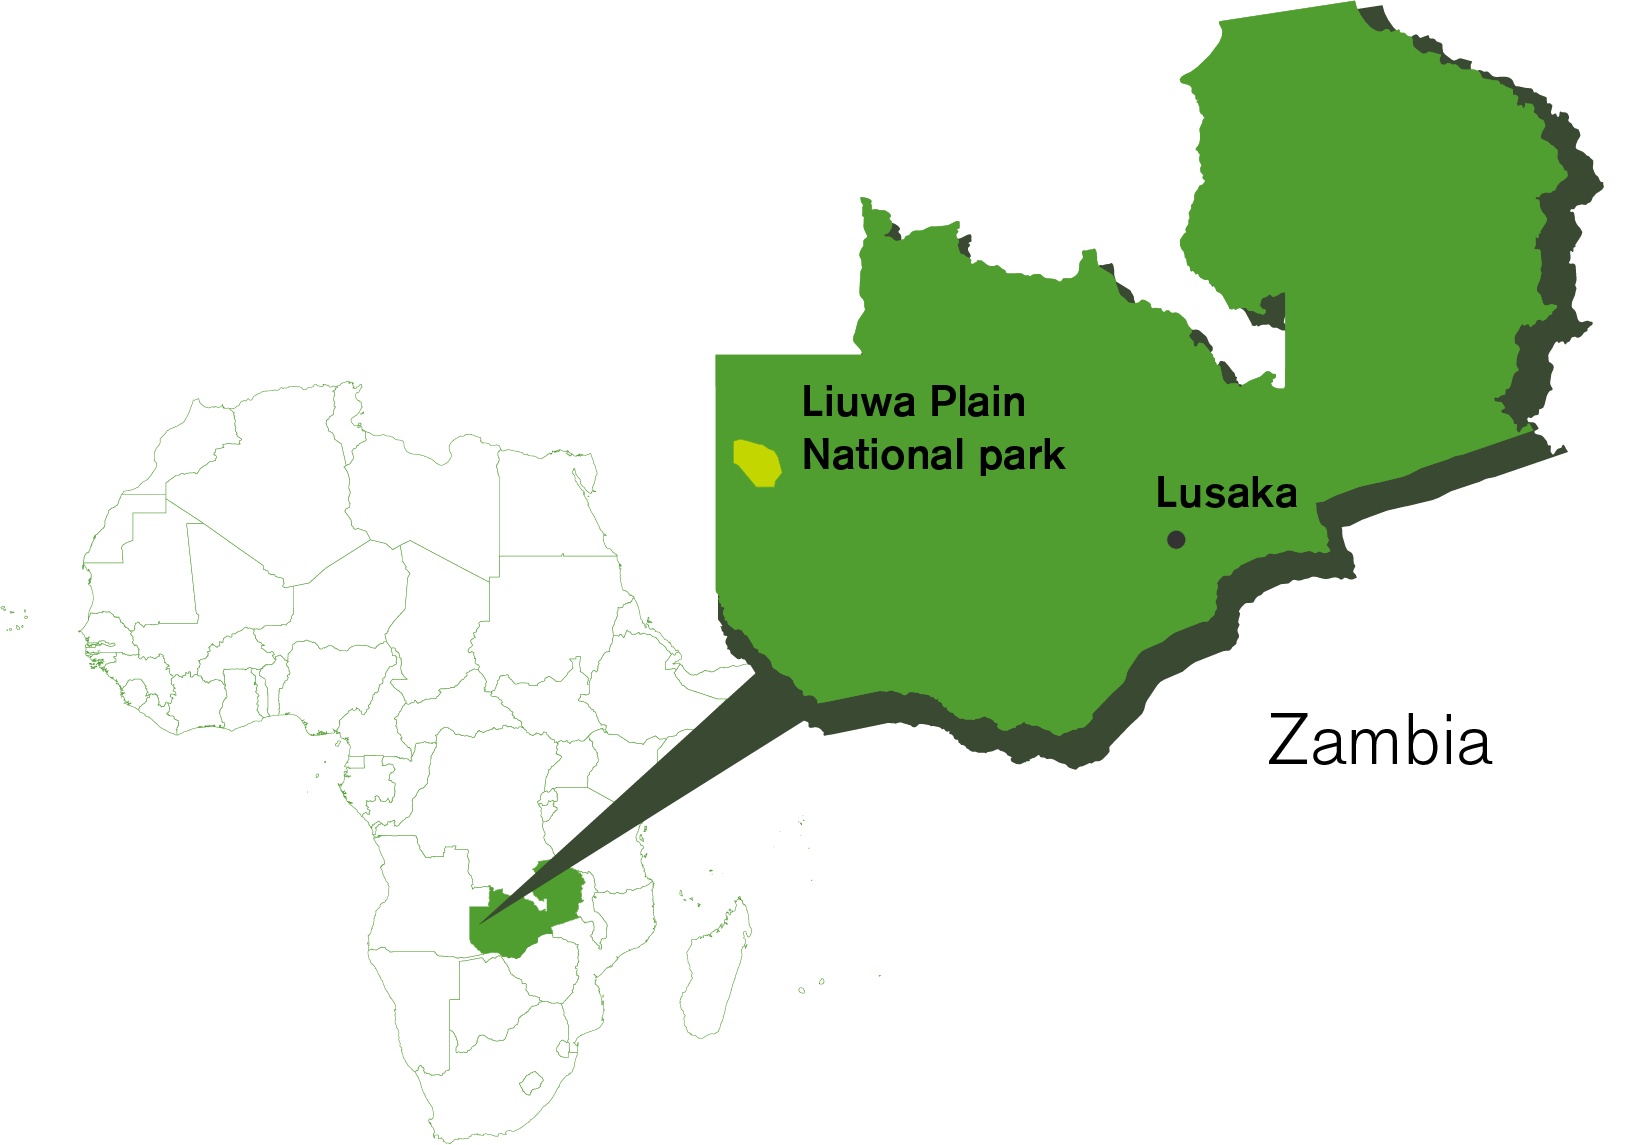 Map showing an enlarged view of Zambia and its location in Africa.